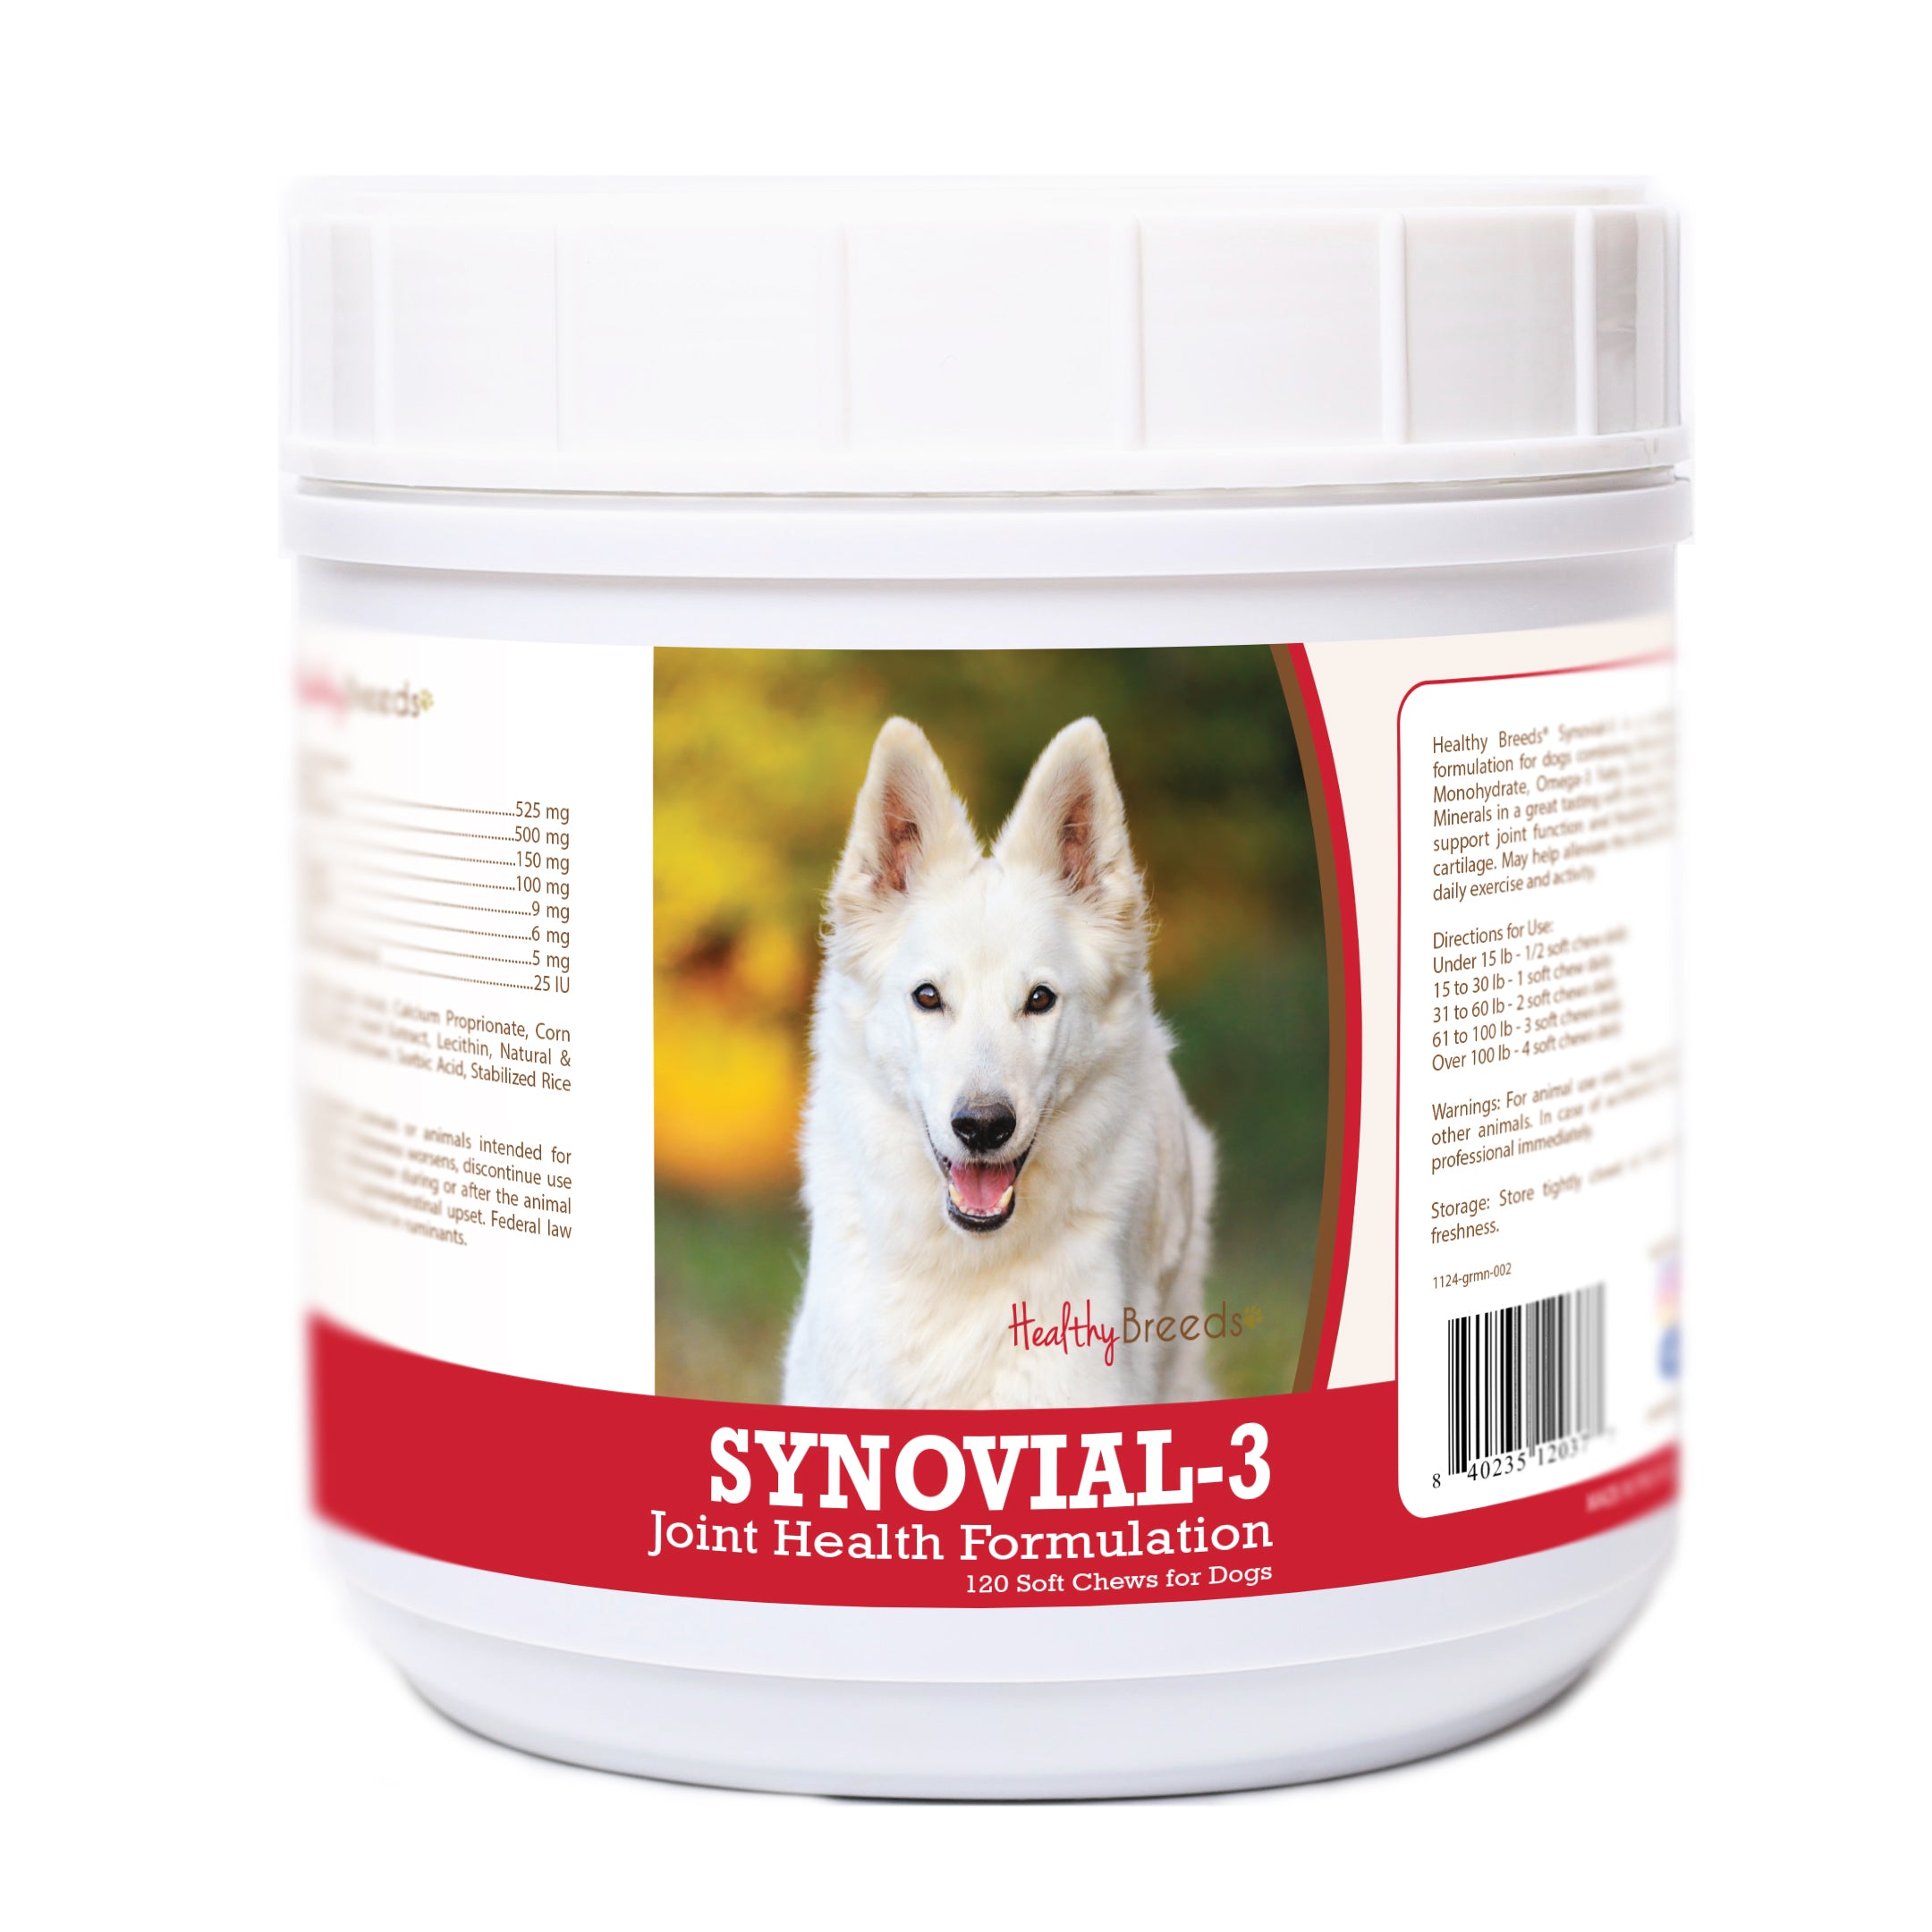 German Shepherd Synovial-3 Joint Health Formulation Soft Chews 120 Count